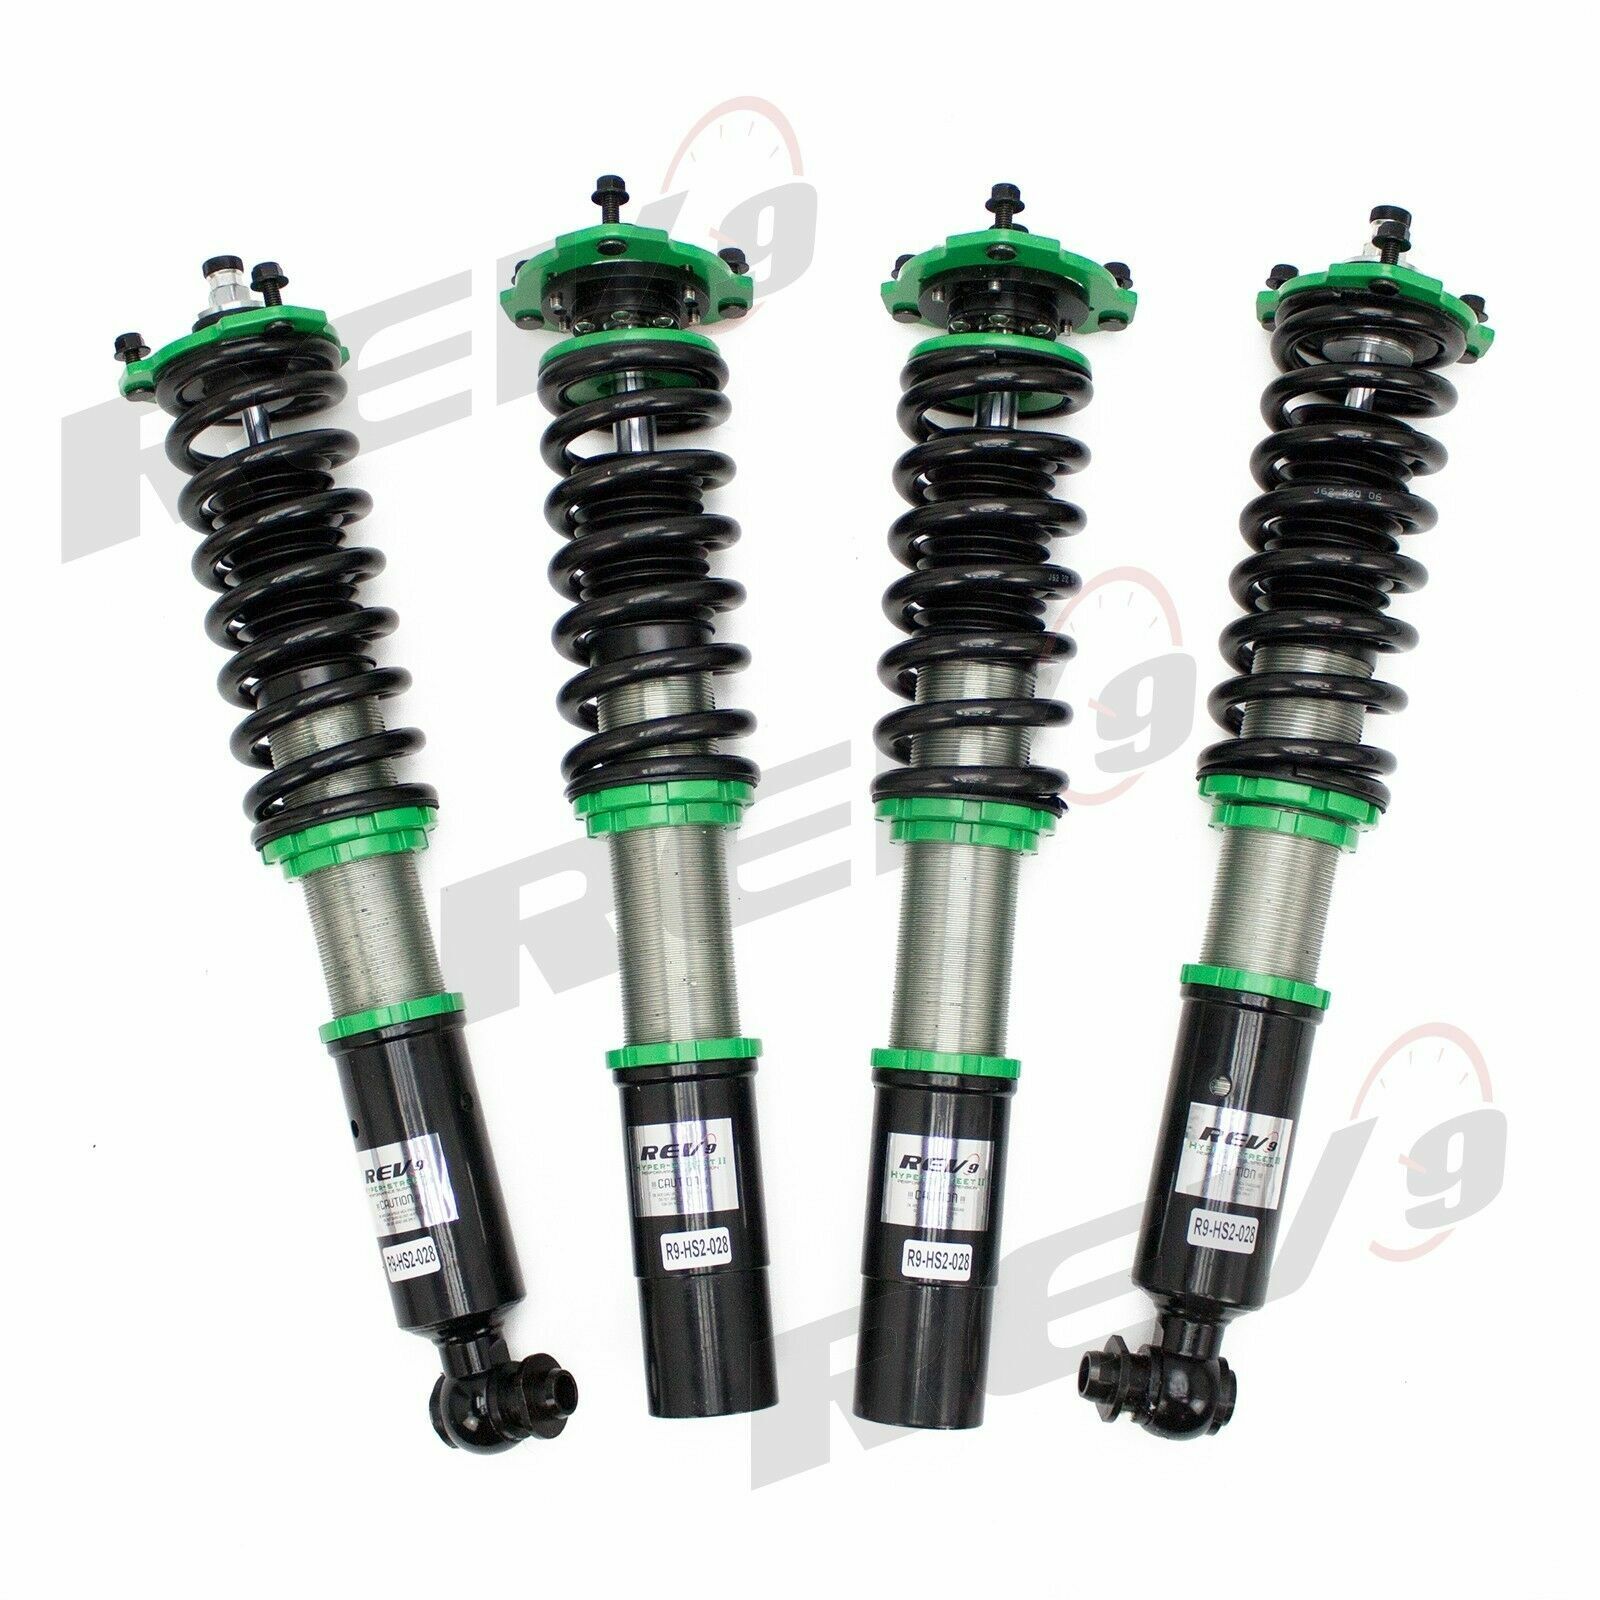 Rev9 Power Hyper Street Coilovers Lowering Suspension BMW 5 Series E39 RWD 96-03